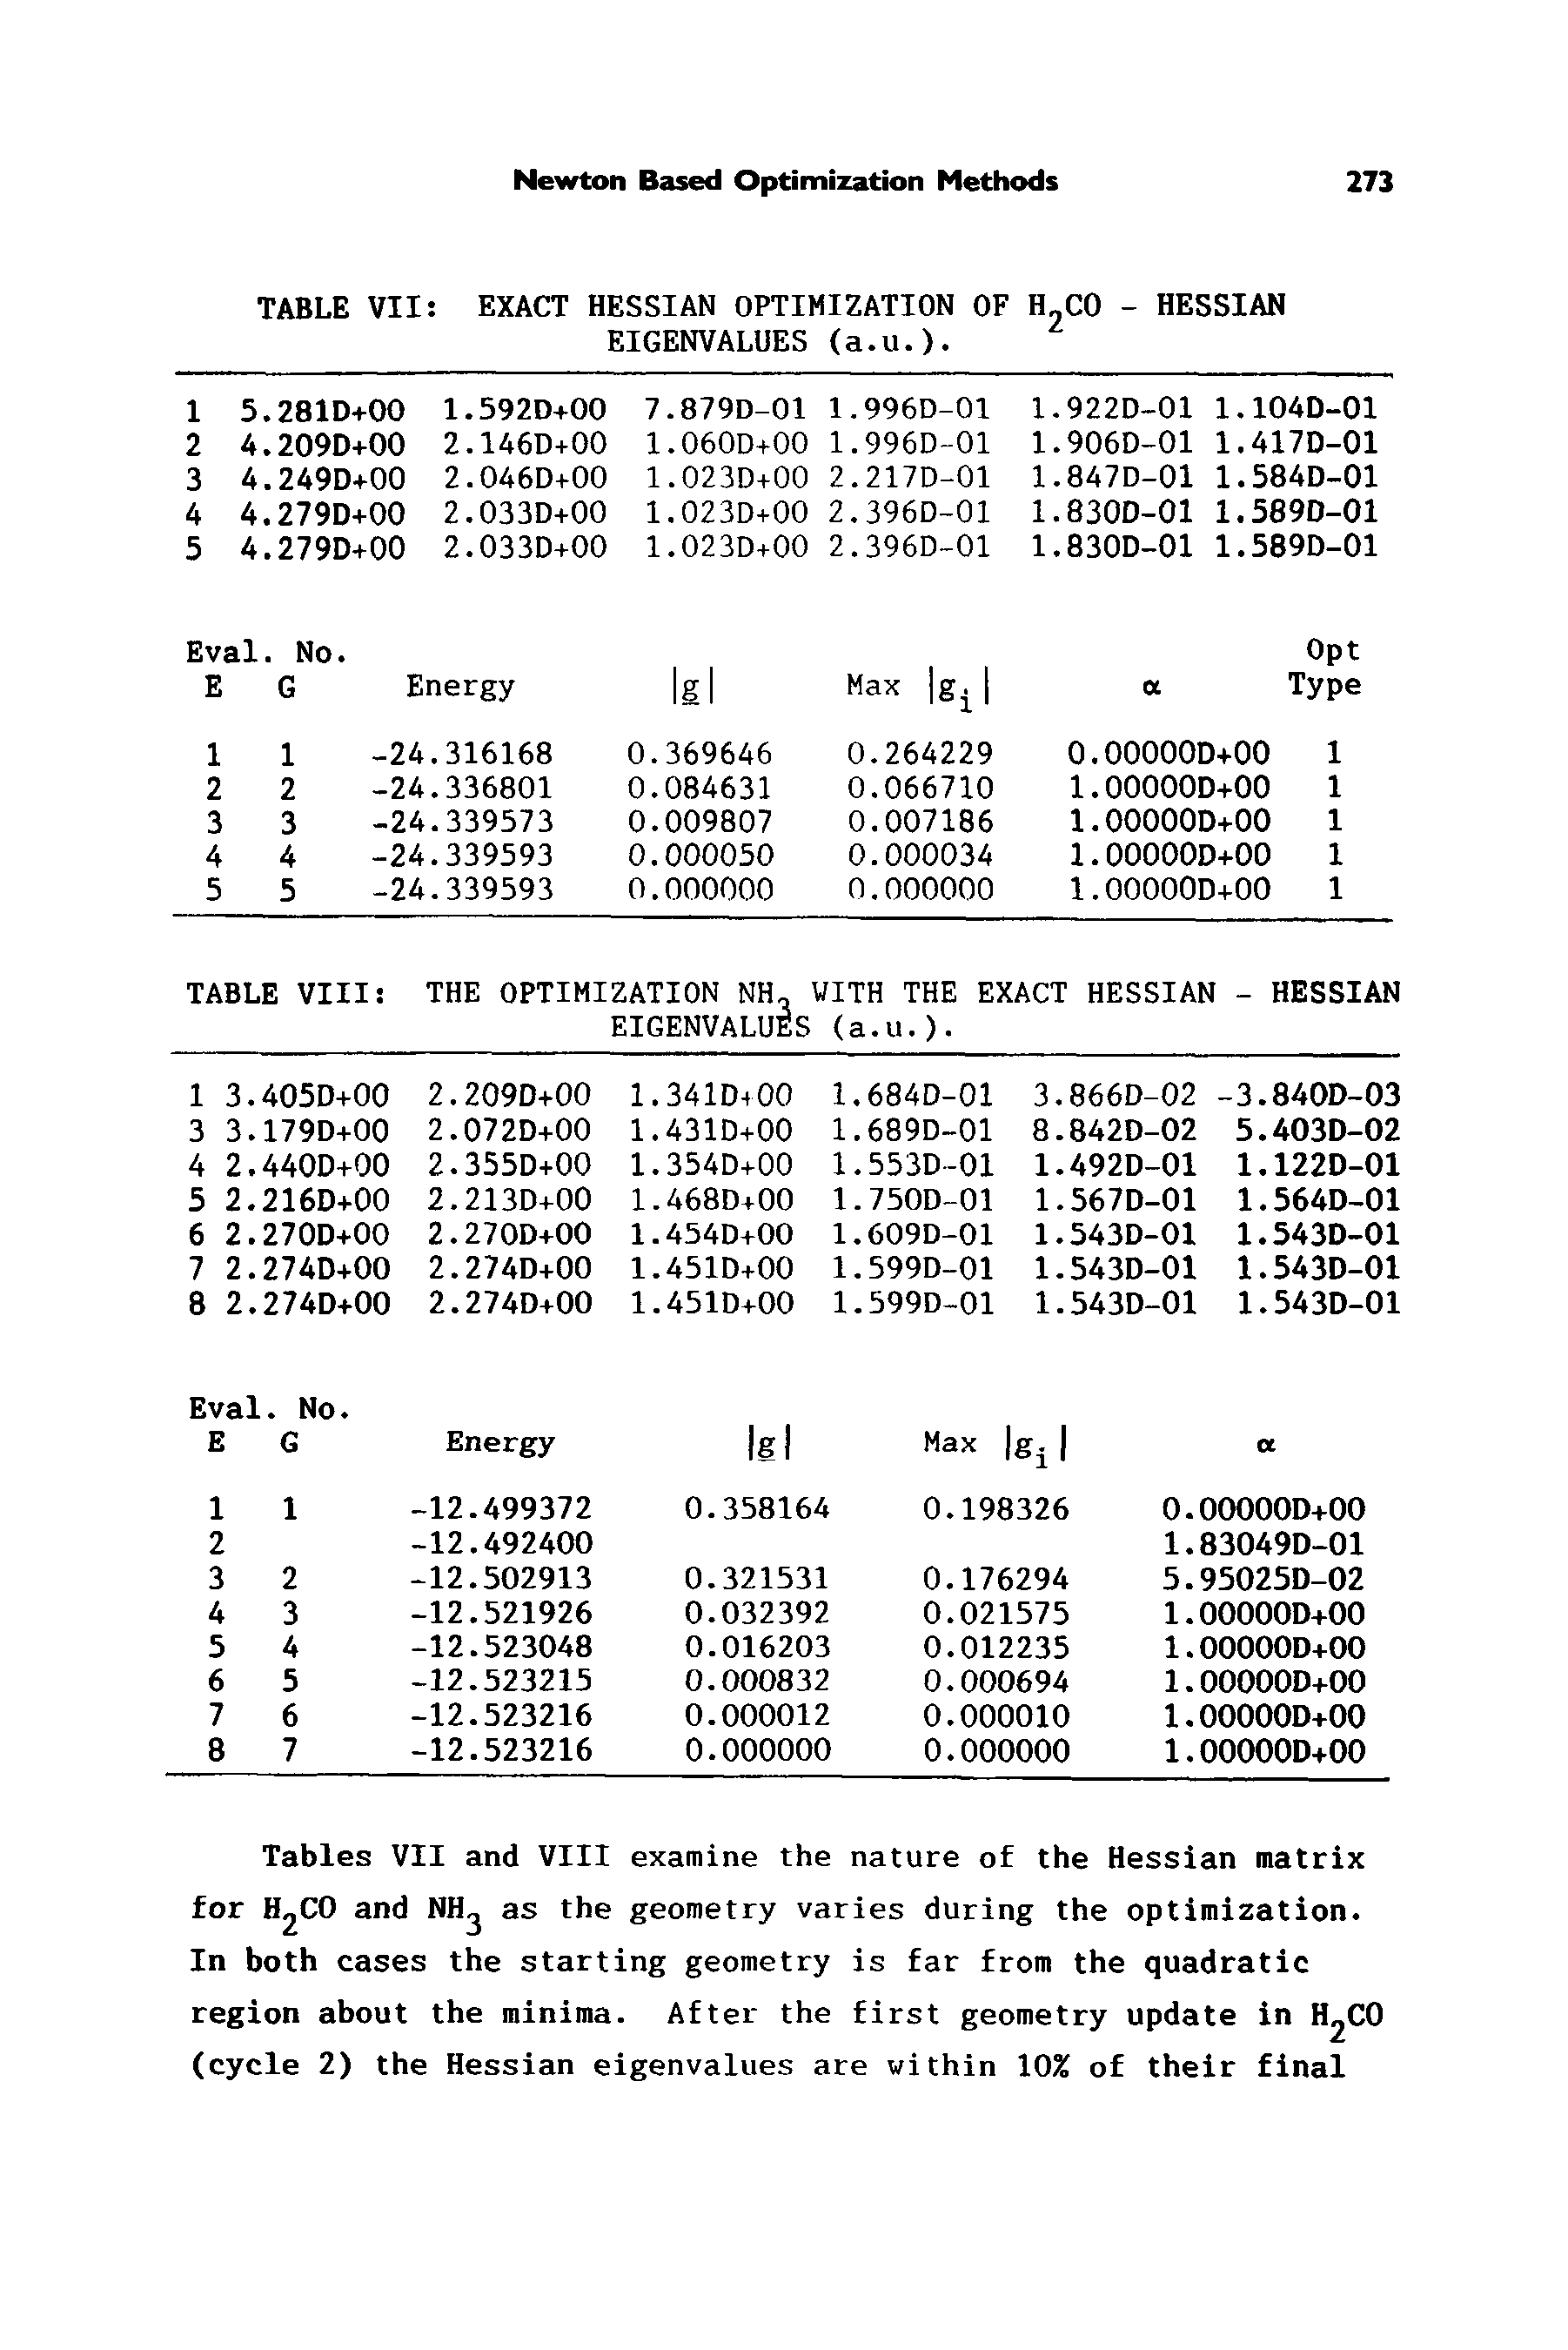 Tables VII and VIII examine the nature of the Hessian matrix for CO and NH as the geometry varies during the optimization. In both cases the starting geometry is far from the quadratic region about the minima. After the first geometry update in HjCO (cycle 2) the Hessian eigenvalues are within 10% of their final...